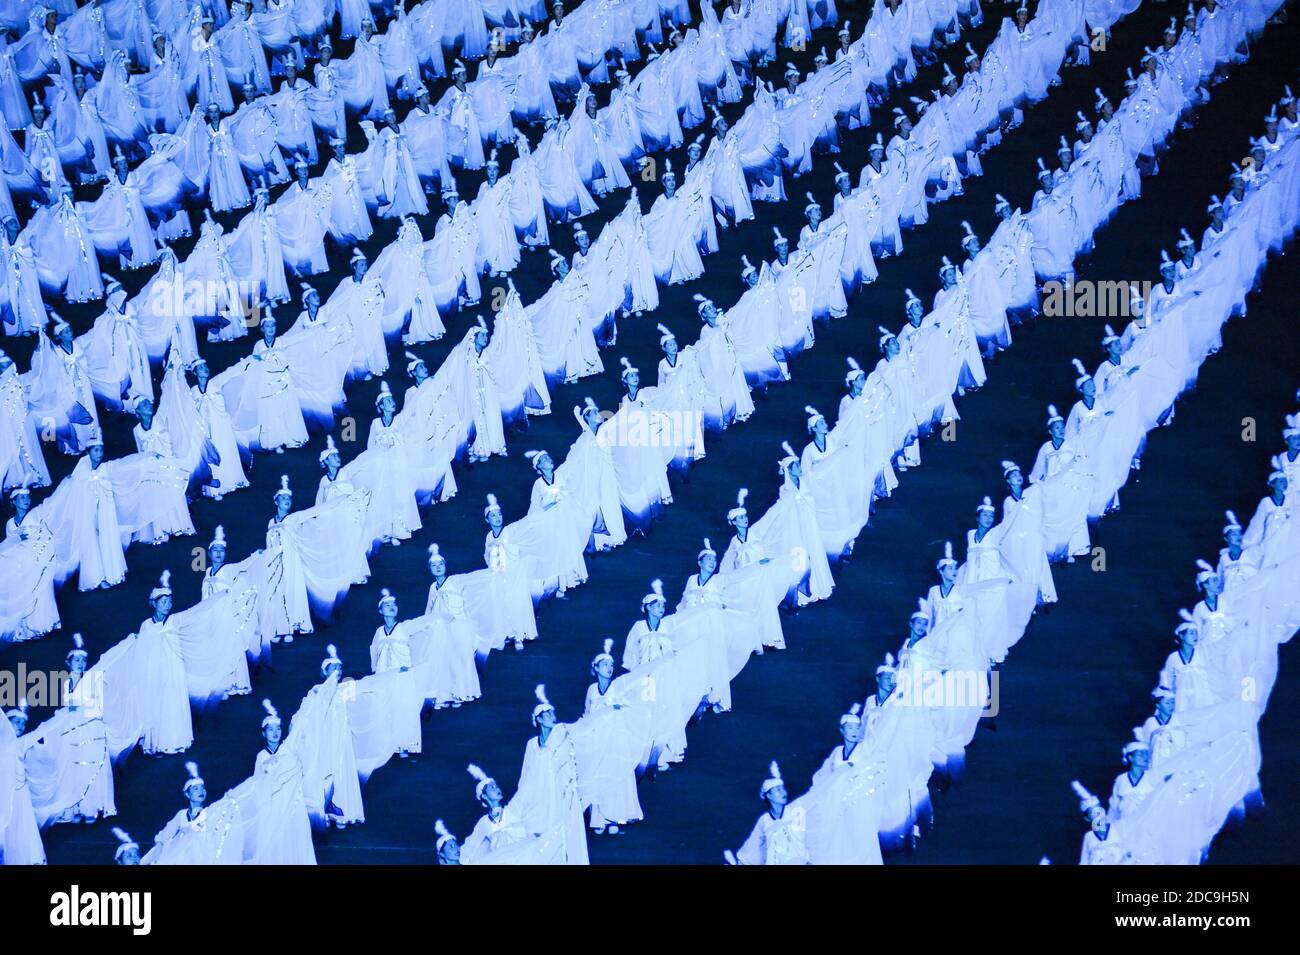 08.08.2012, Pyongyang, , North Korea - Mass choreography and artistic performance with dancers and acrobats at the May Day Stadium during the Arirang Stock Photo